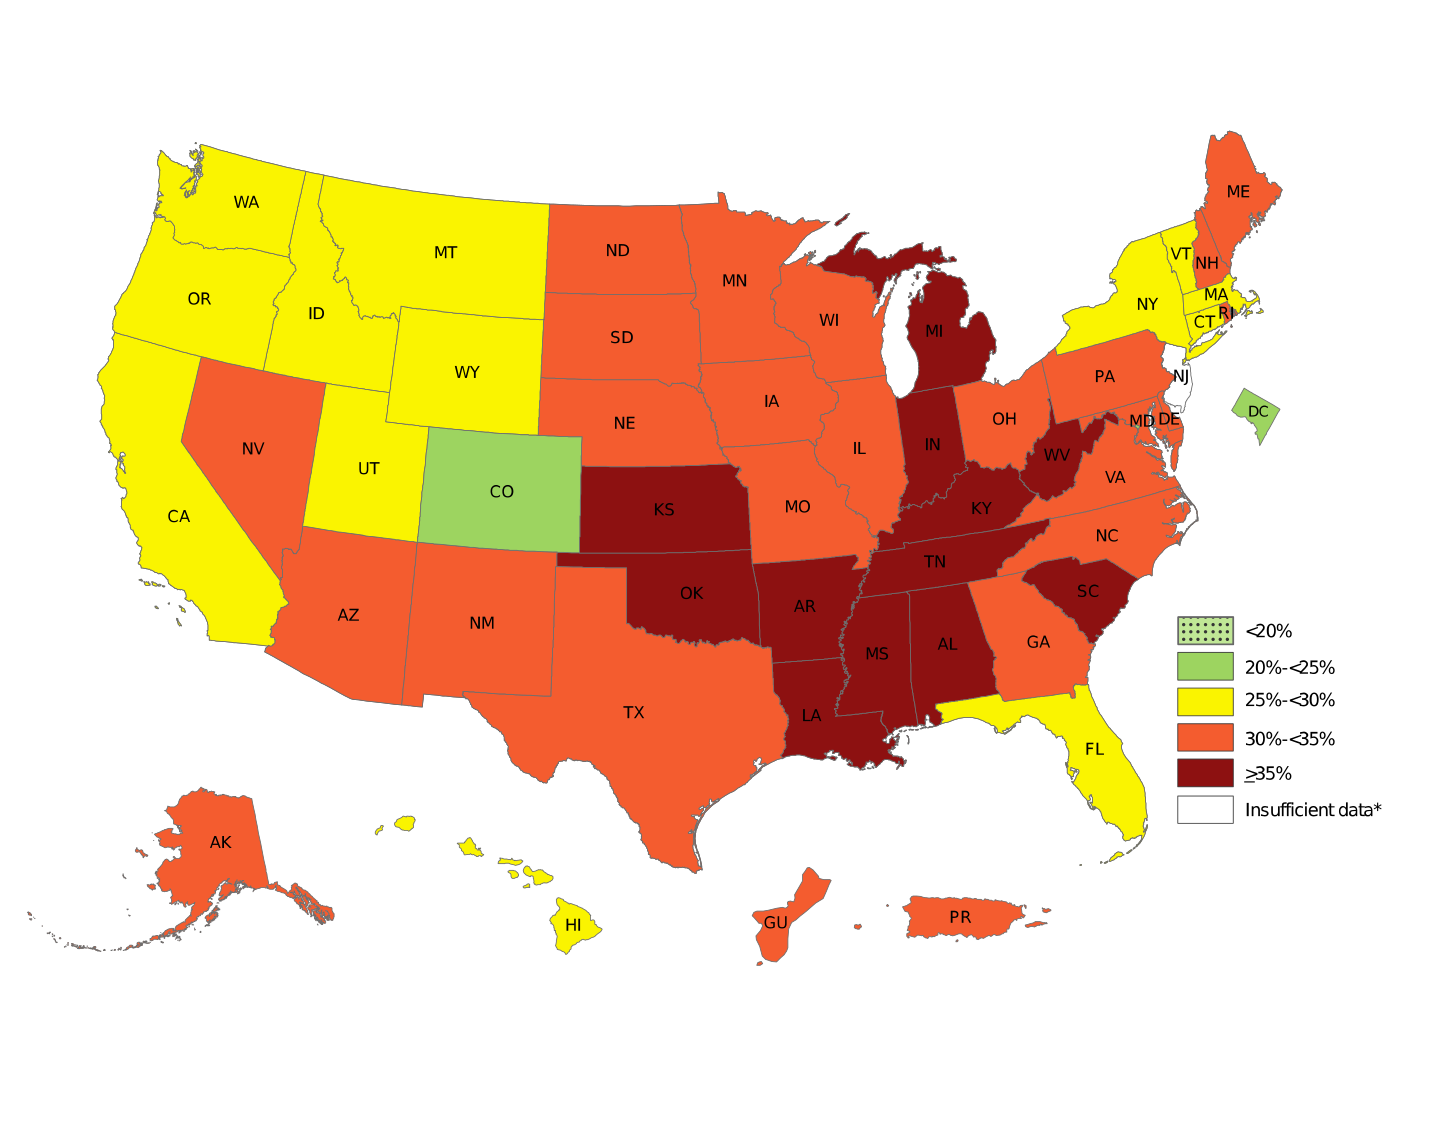 Prevalence of Self-Reported Obesity Among U.S. Adults by State and Territory, BRFSS, 2018. See map details in table below.